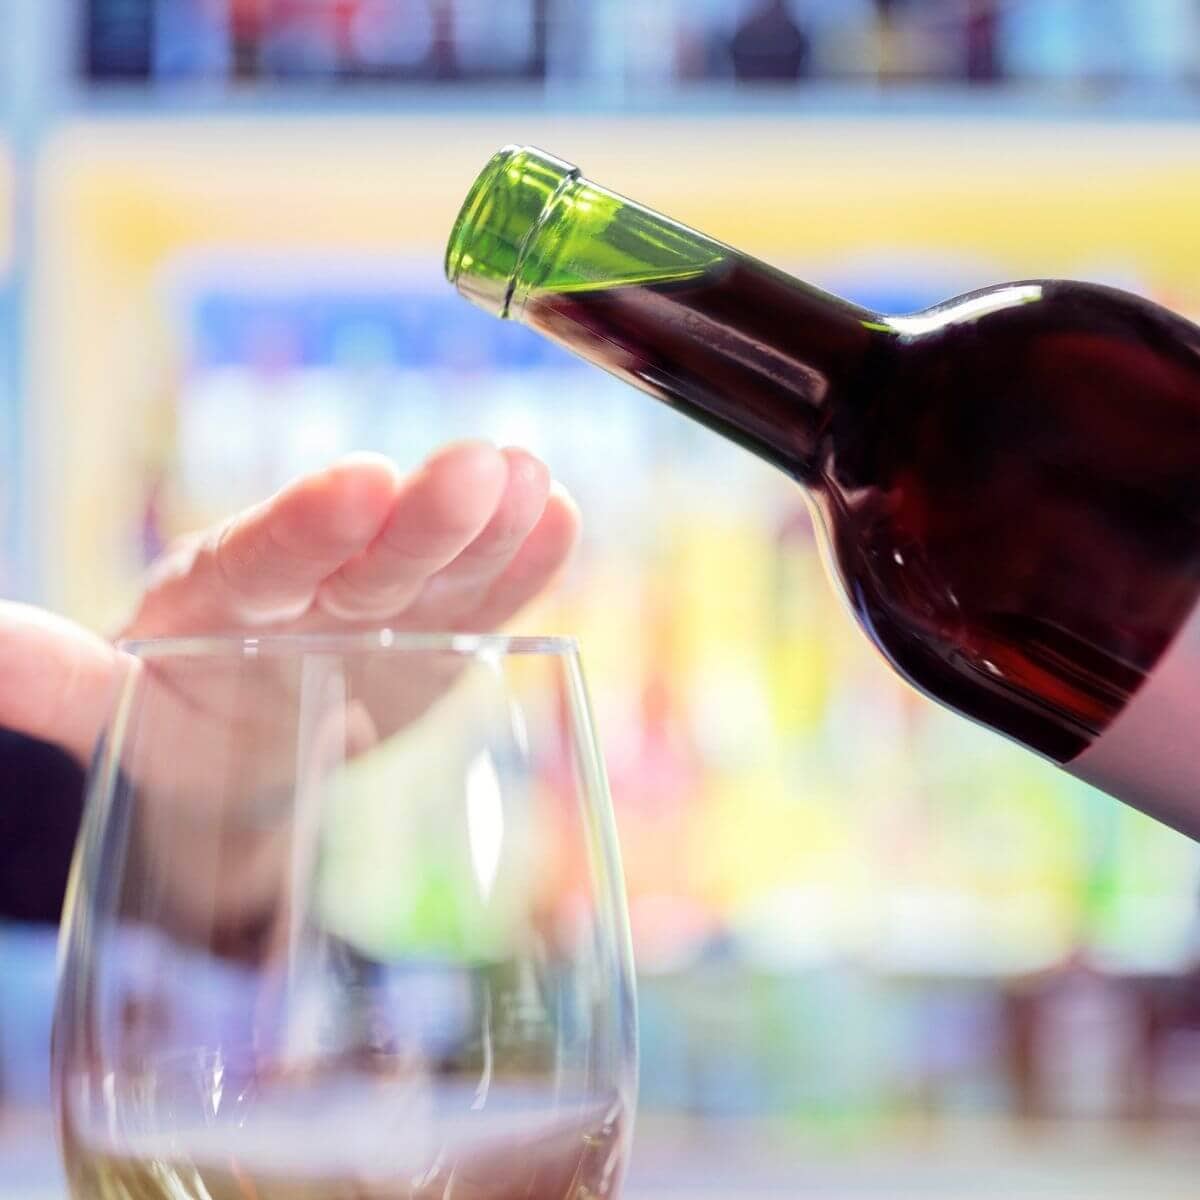 An empty stemless wine glass sitting on a table with a woman's hand over the top blocking wine from being poured in the glass while to the right of the glass is a green wine bottle with a dark red wine almost being poured over the hand that is covering the glass